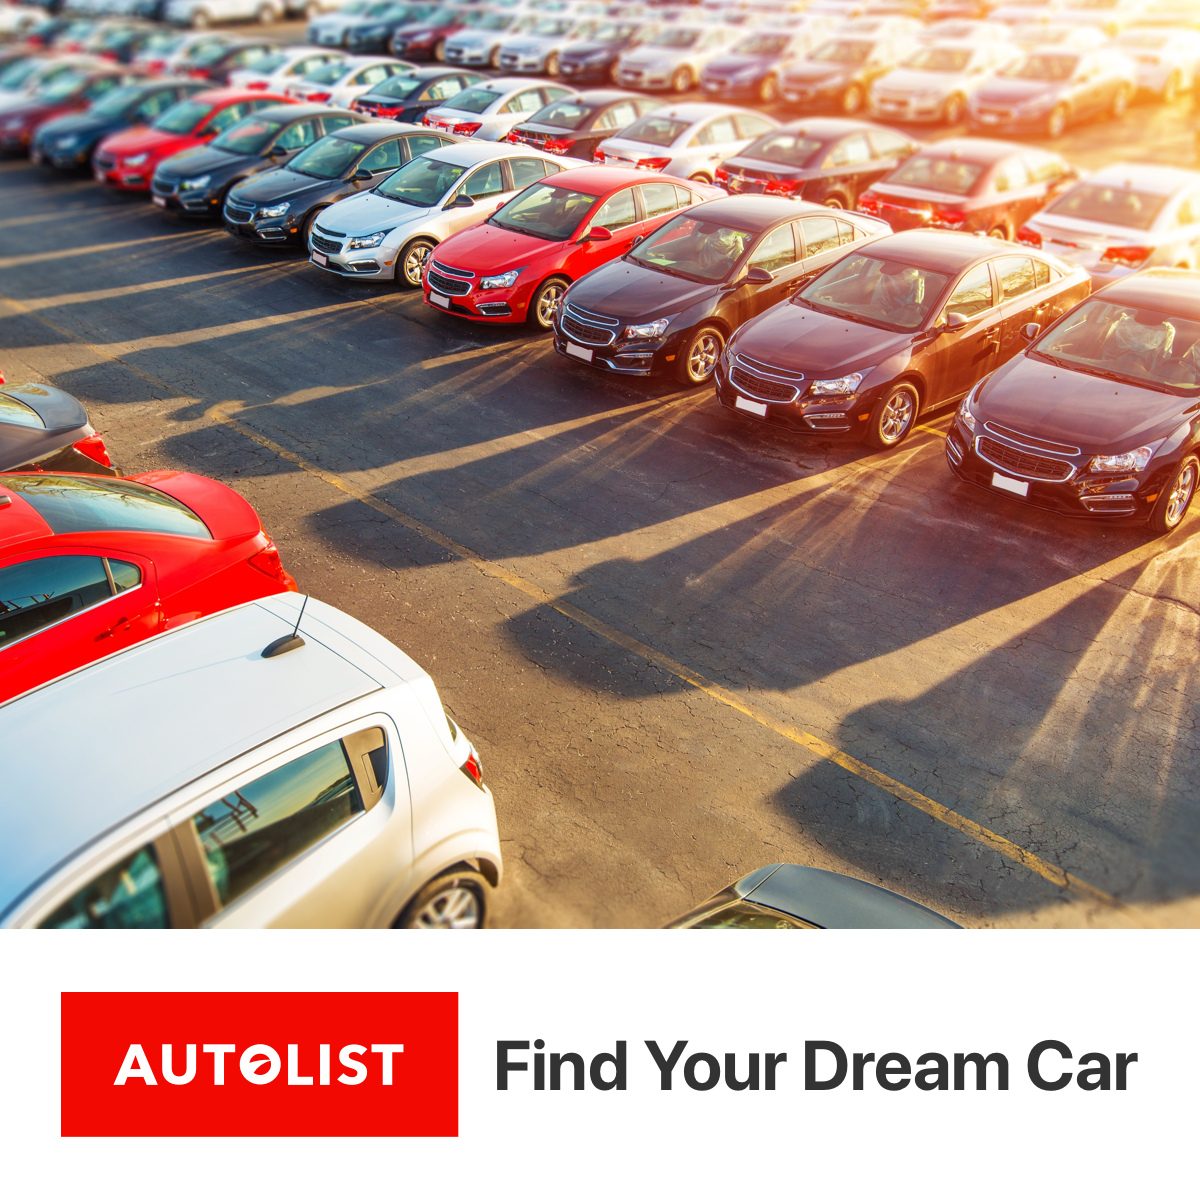 Autolist: Search New and Used Cars for Sale, Compare Prices and